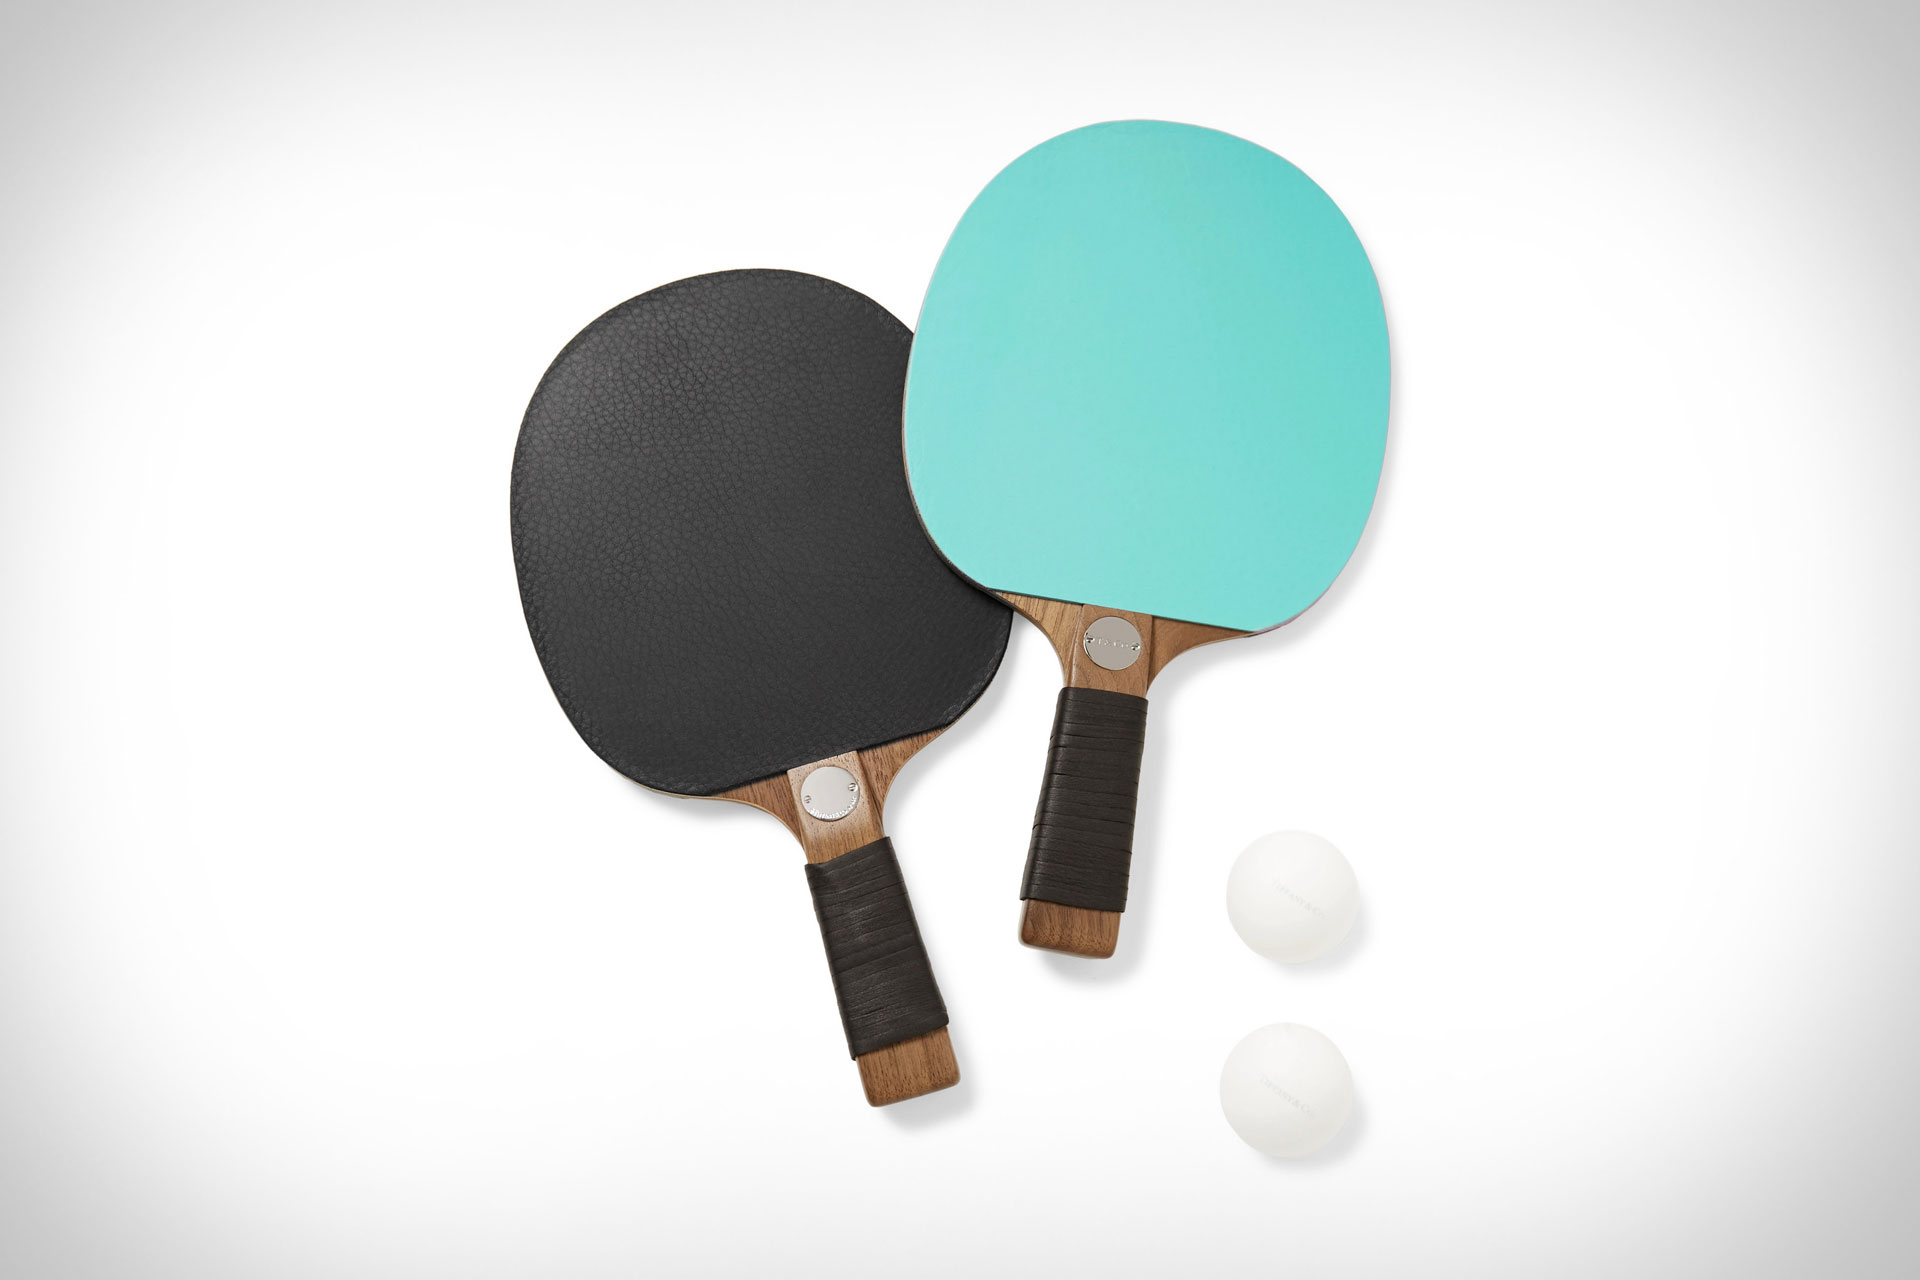 Tiffany & Co. Table Tennis Set | Uncrate